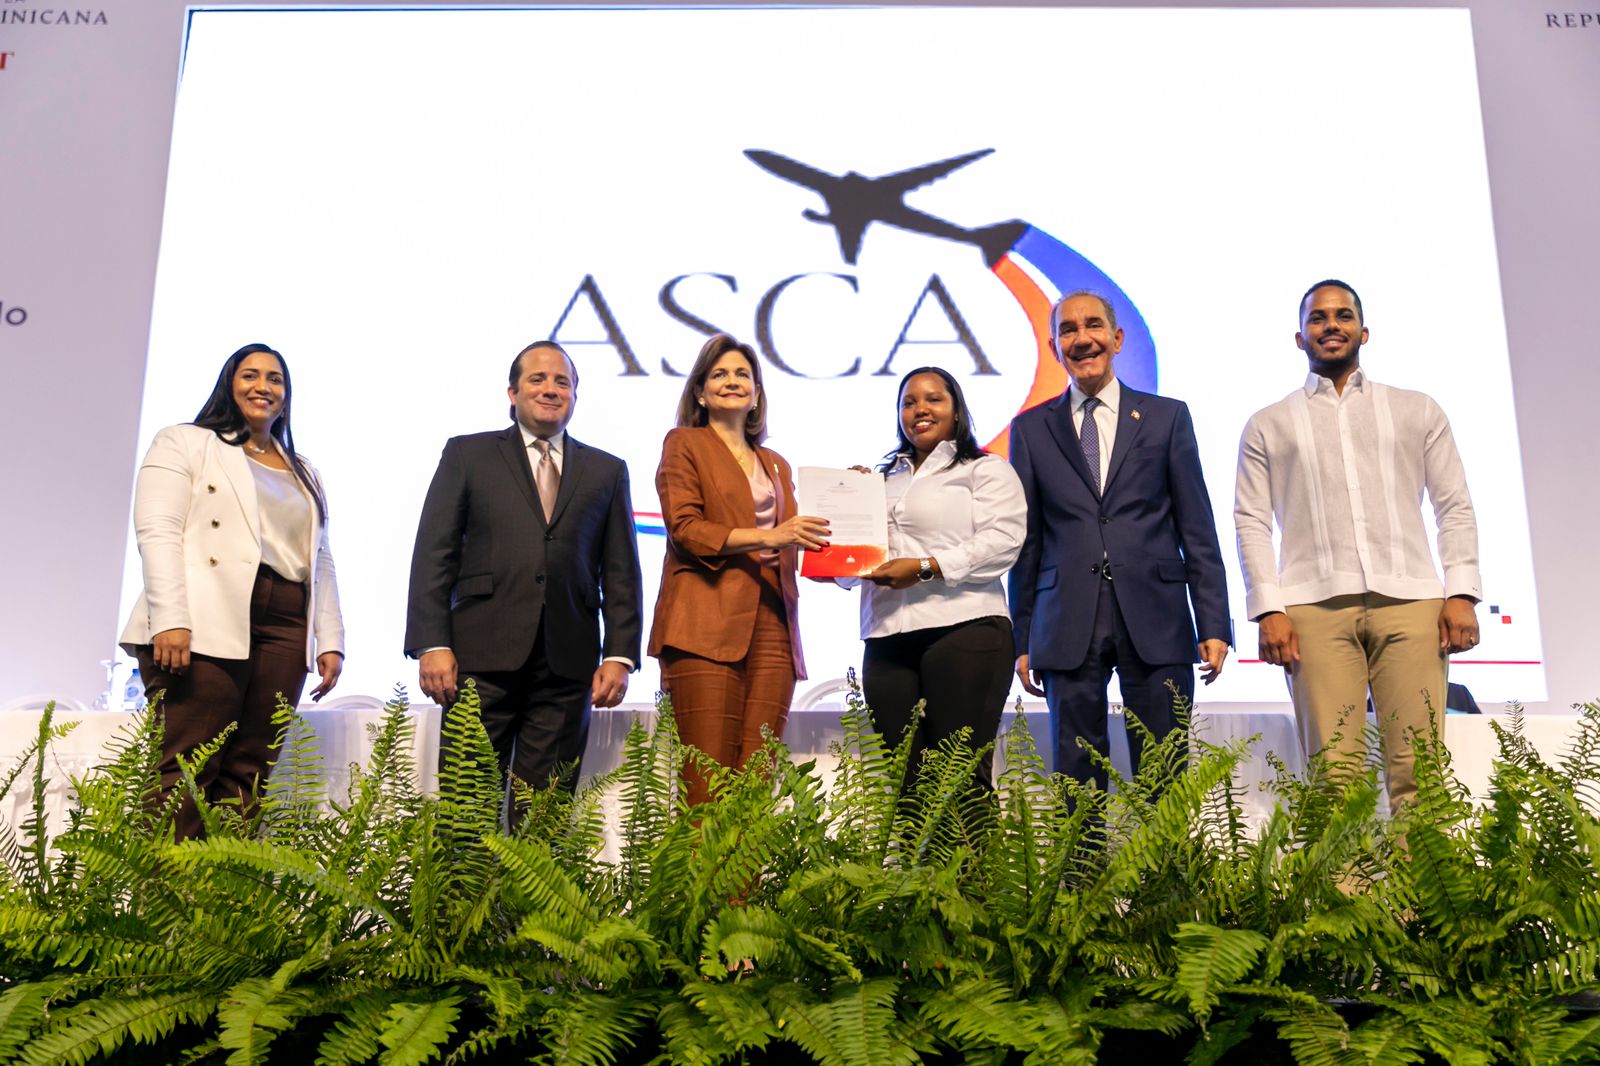 Vice President Raquel Peña presided over the award ceremony for 10,000 national and international scholarships for young people from around the country